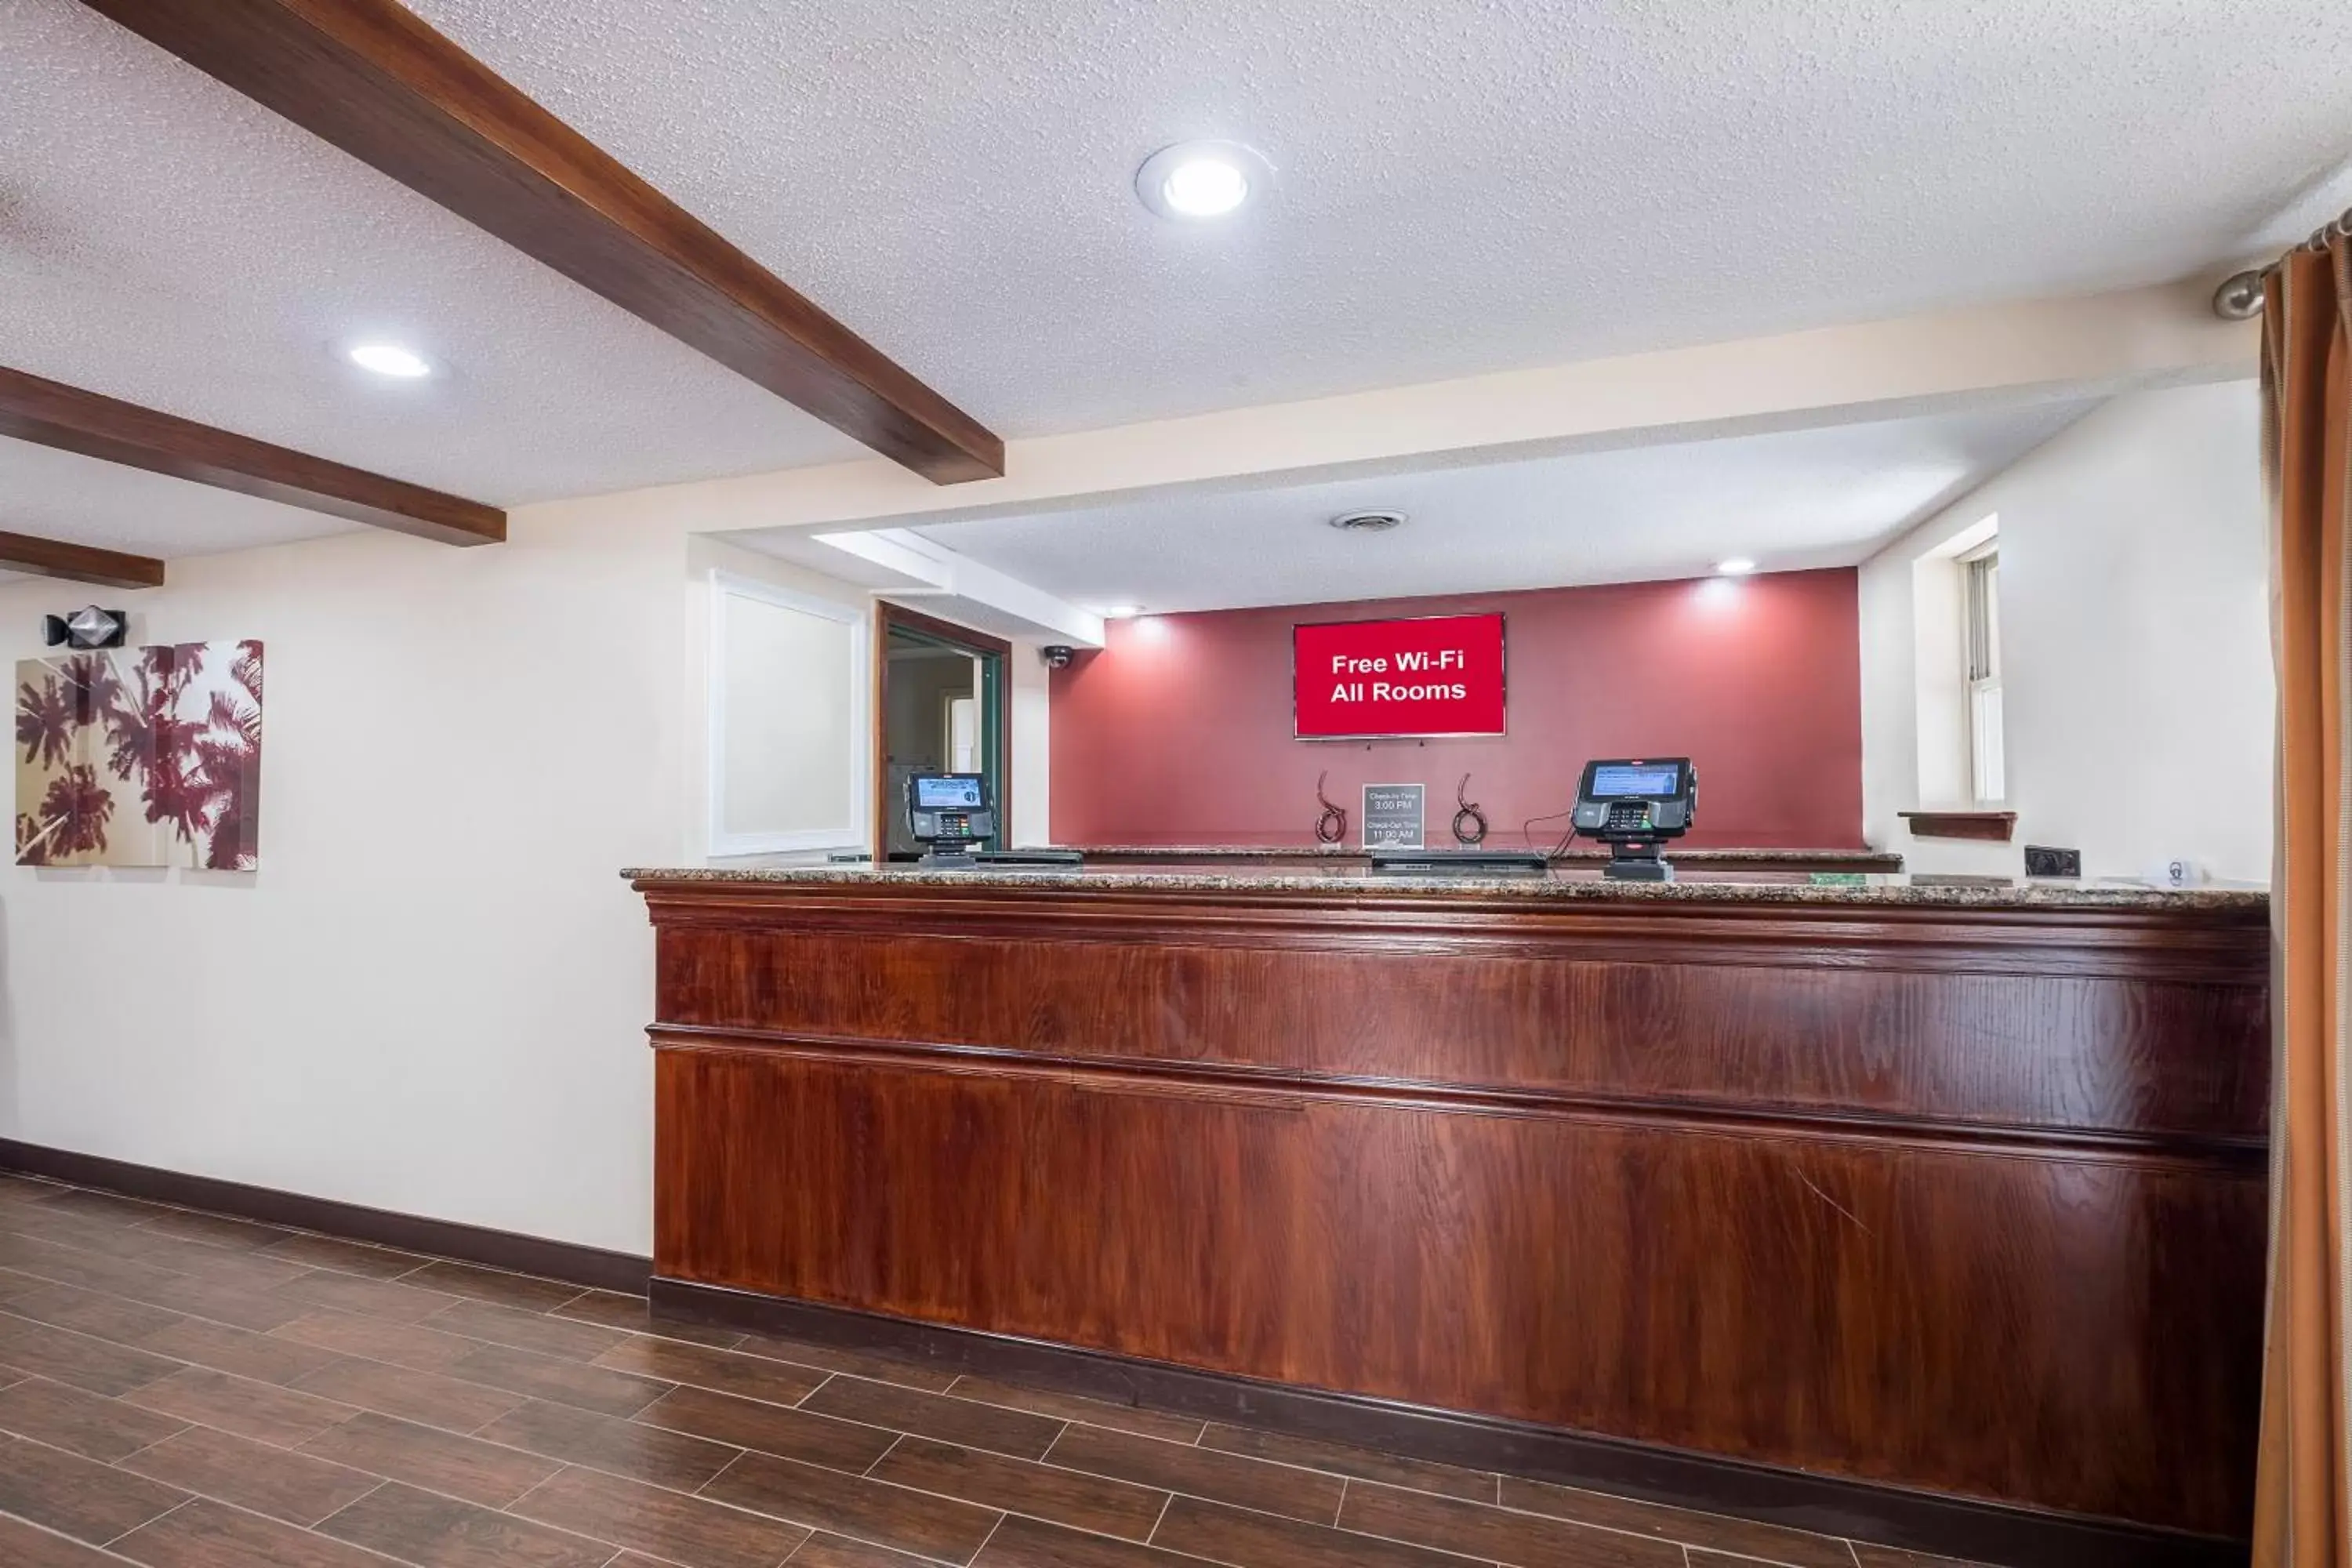 Lobby or reception, Lobby/Reception in Red Roof Inn & Suites Stafford